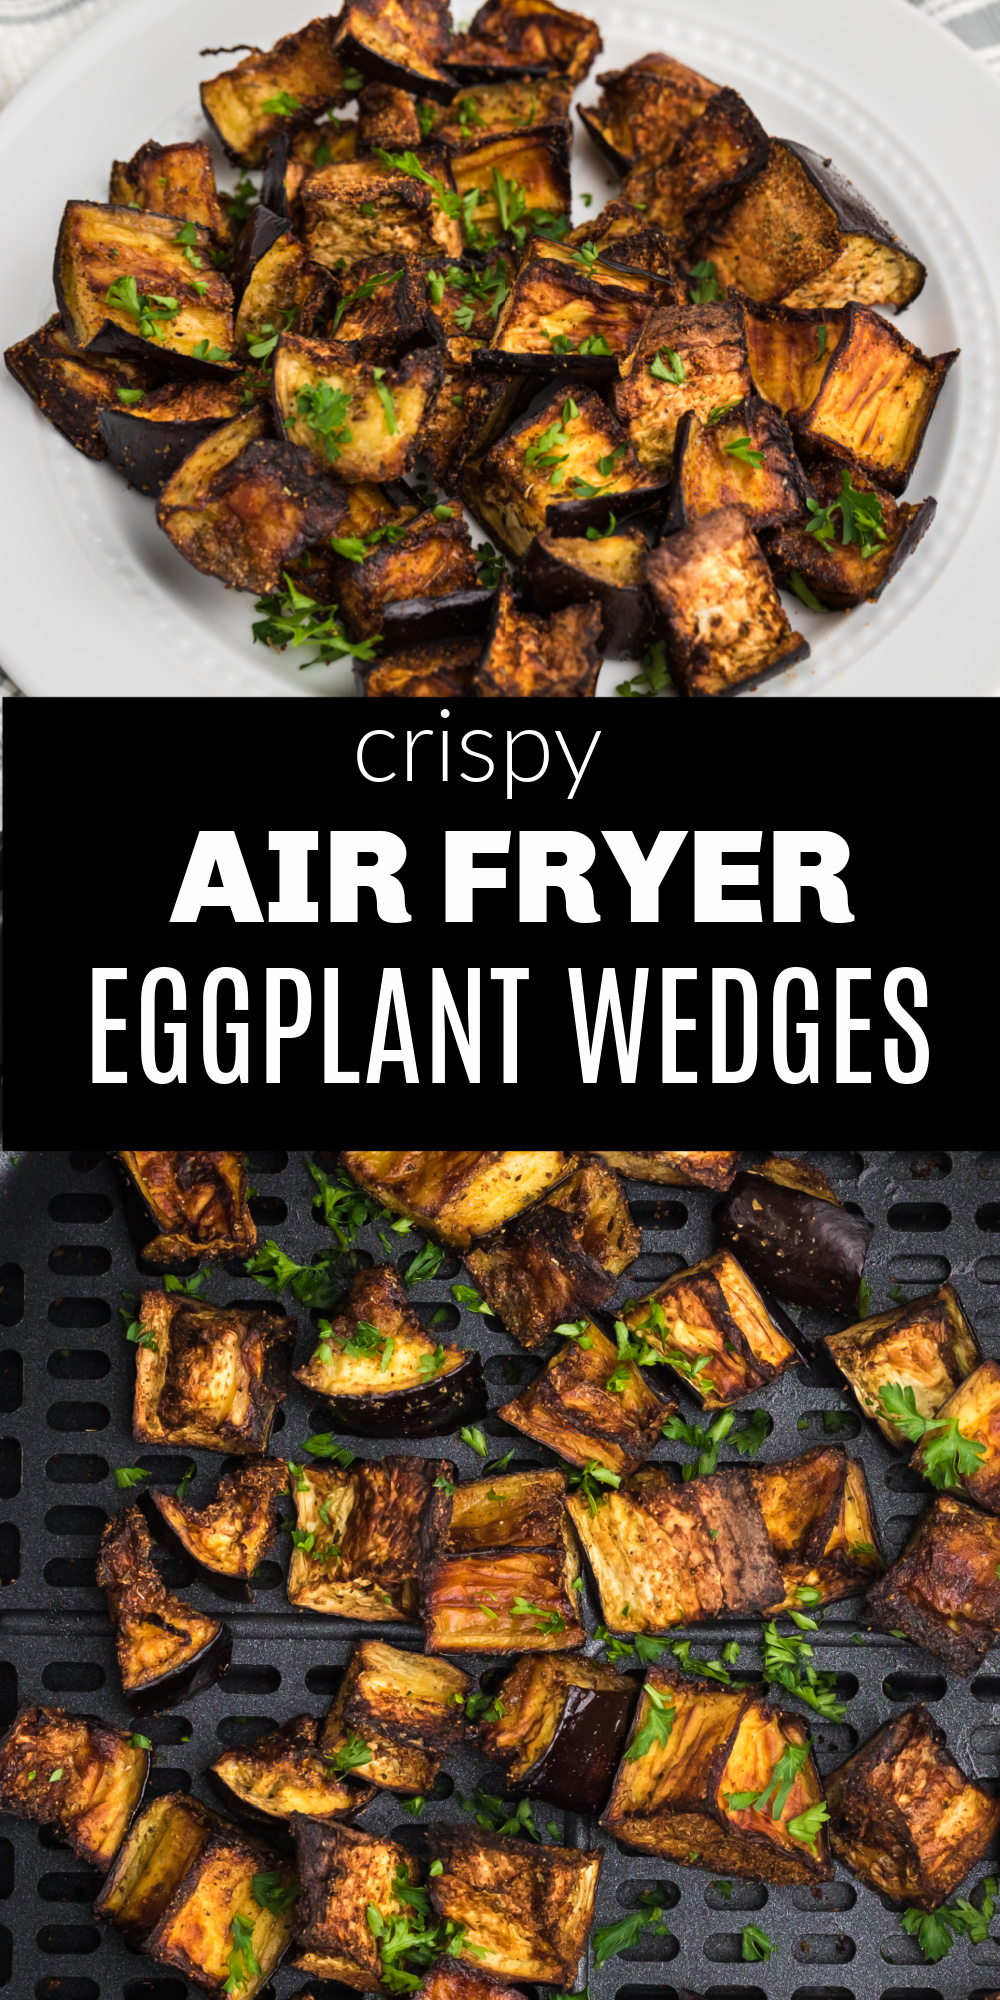 This Air Fryer Eggplant is a bite-sized delight! Made with eggplant, olive oil, and the perfect blend of seasonings for a delicious low carb snack or side dish that everyone will love.